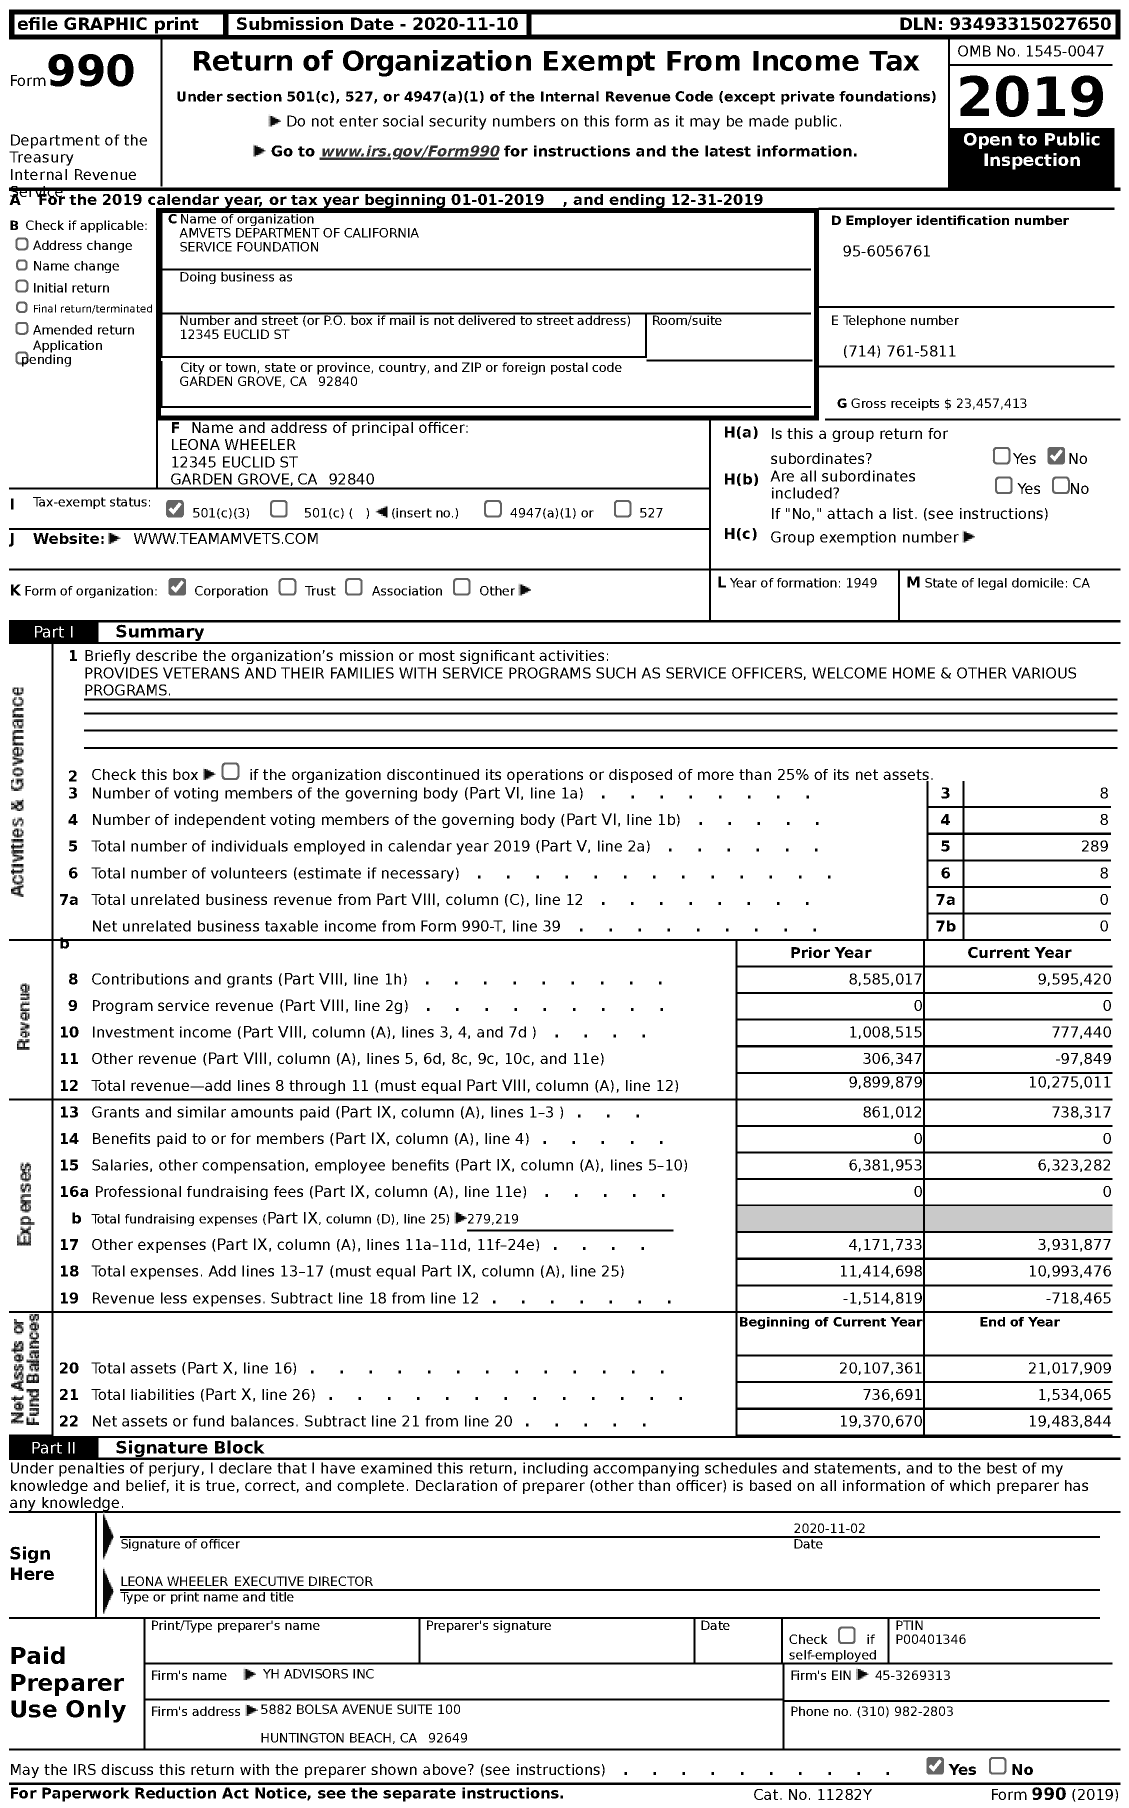 Image of first page of 2019 Form 990 for Amvets Department of California Service Foundation